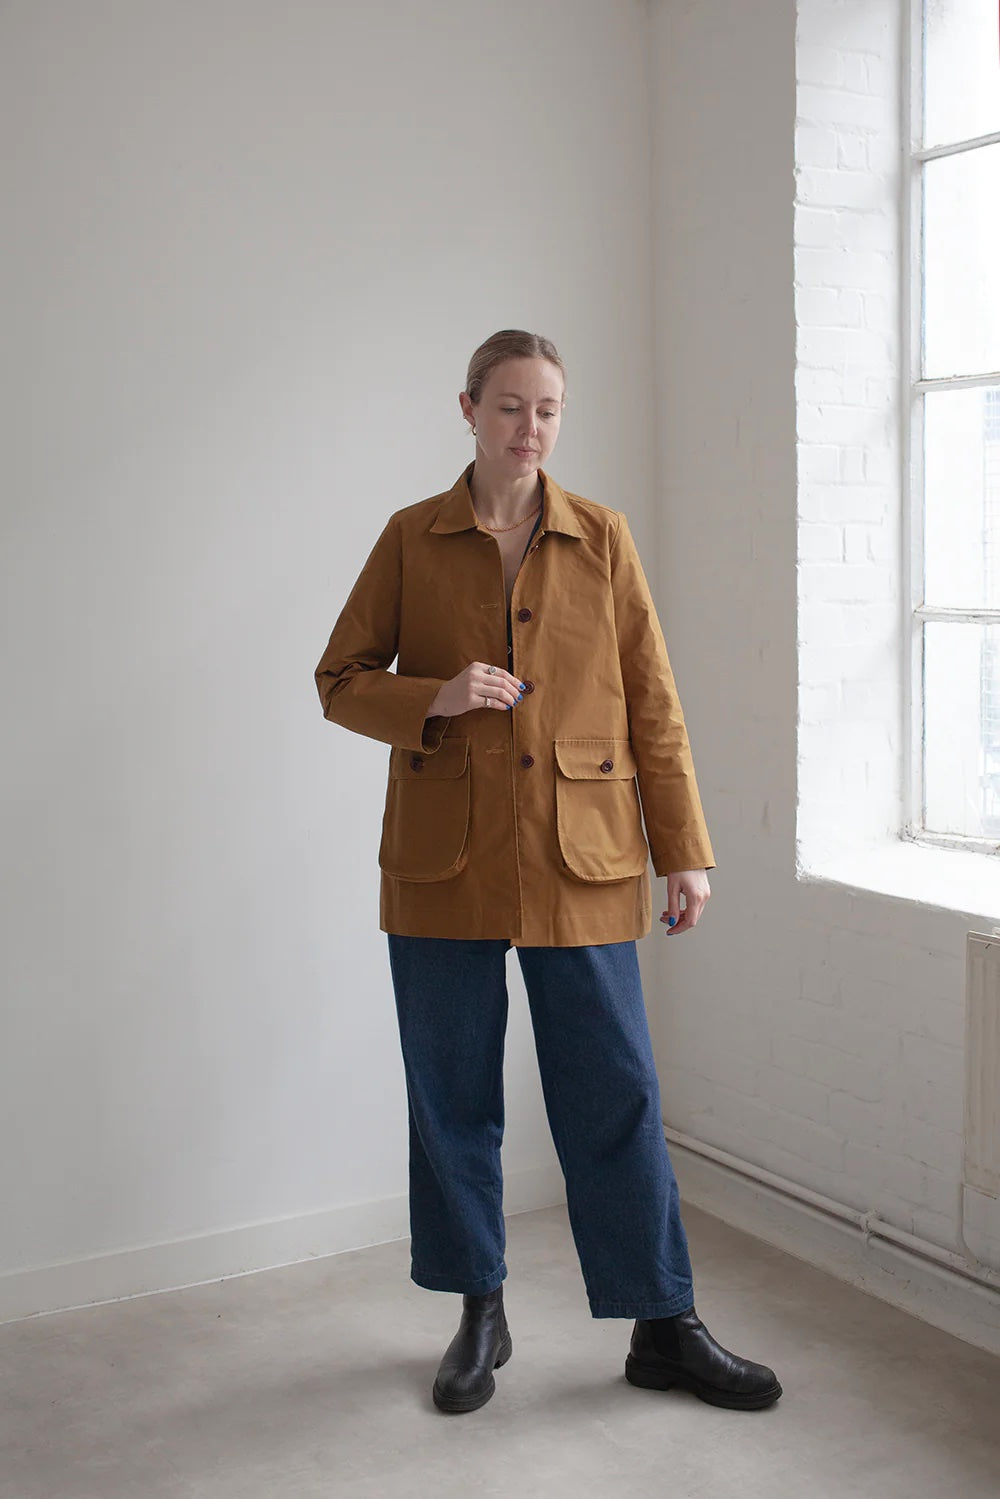 Woman wearing the Potters Jacket sewing pattern from The Modern Sewing Co. on The Fold Line. A jacket pattern made in waxed cottons, wools, denims, cotton canvas, linens or hemp fabrics, featuring a two-piece sleeve, collar, pockets, full length sleeves, 